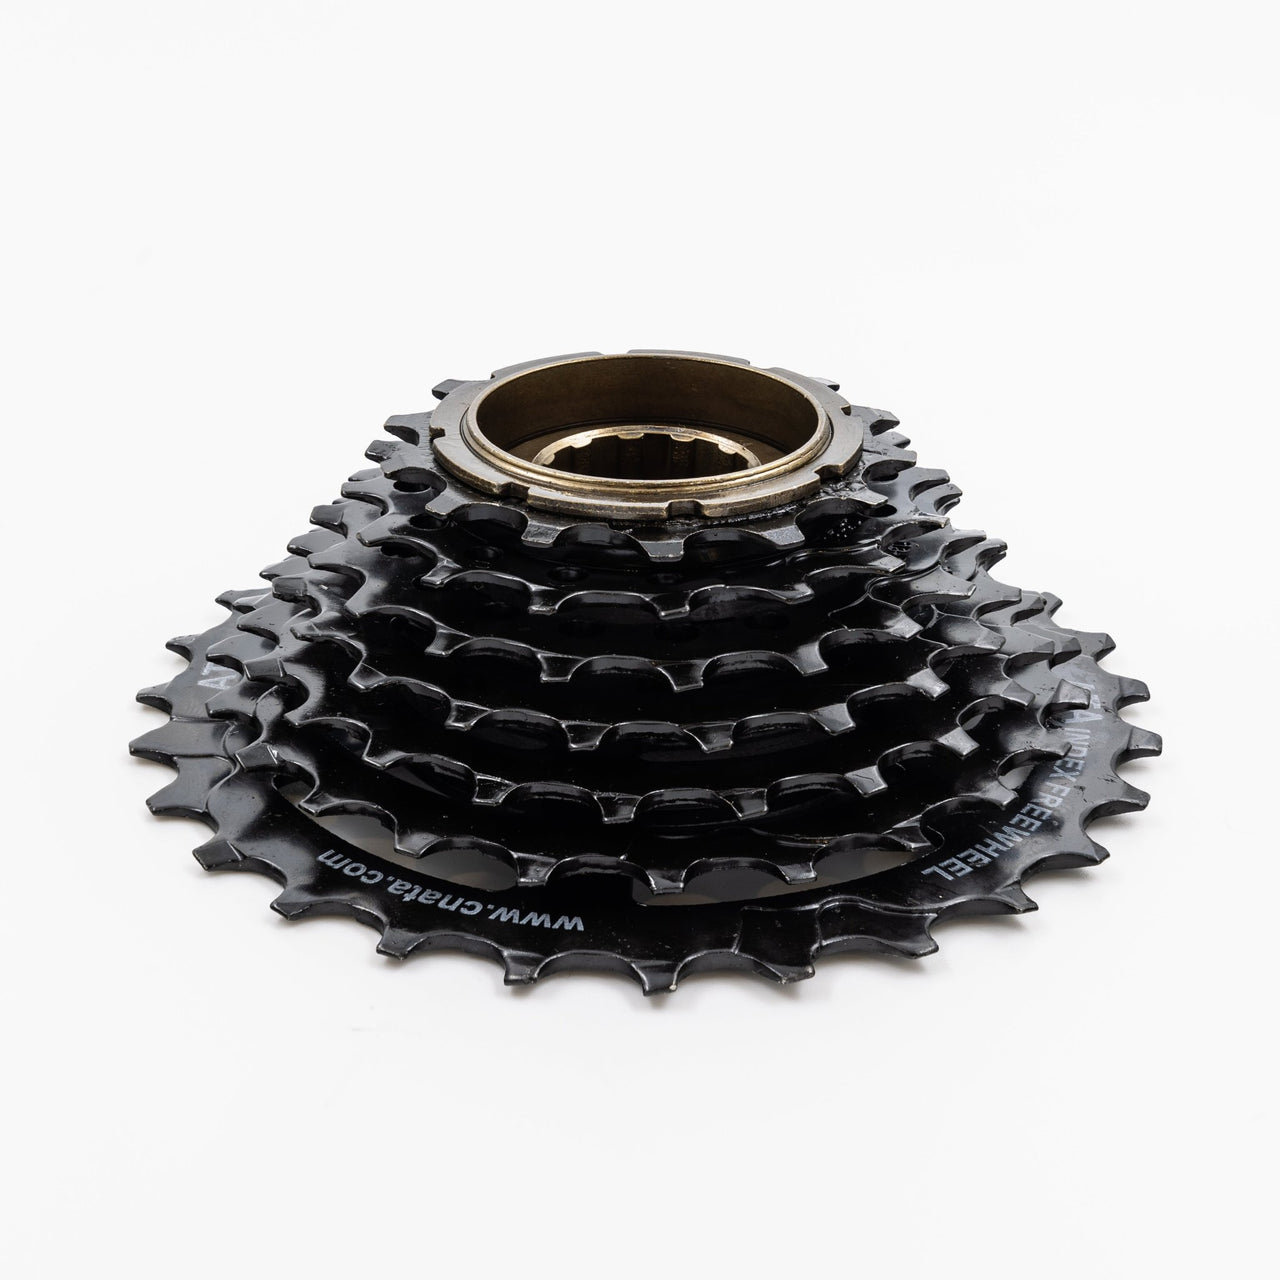 7 Speed 14-28T Indexed Freewheel Shimano Compatible Cassette Black Rust-Proof - Air BikeBicycle Cassettes & Freewheels